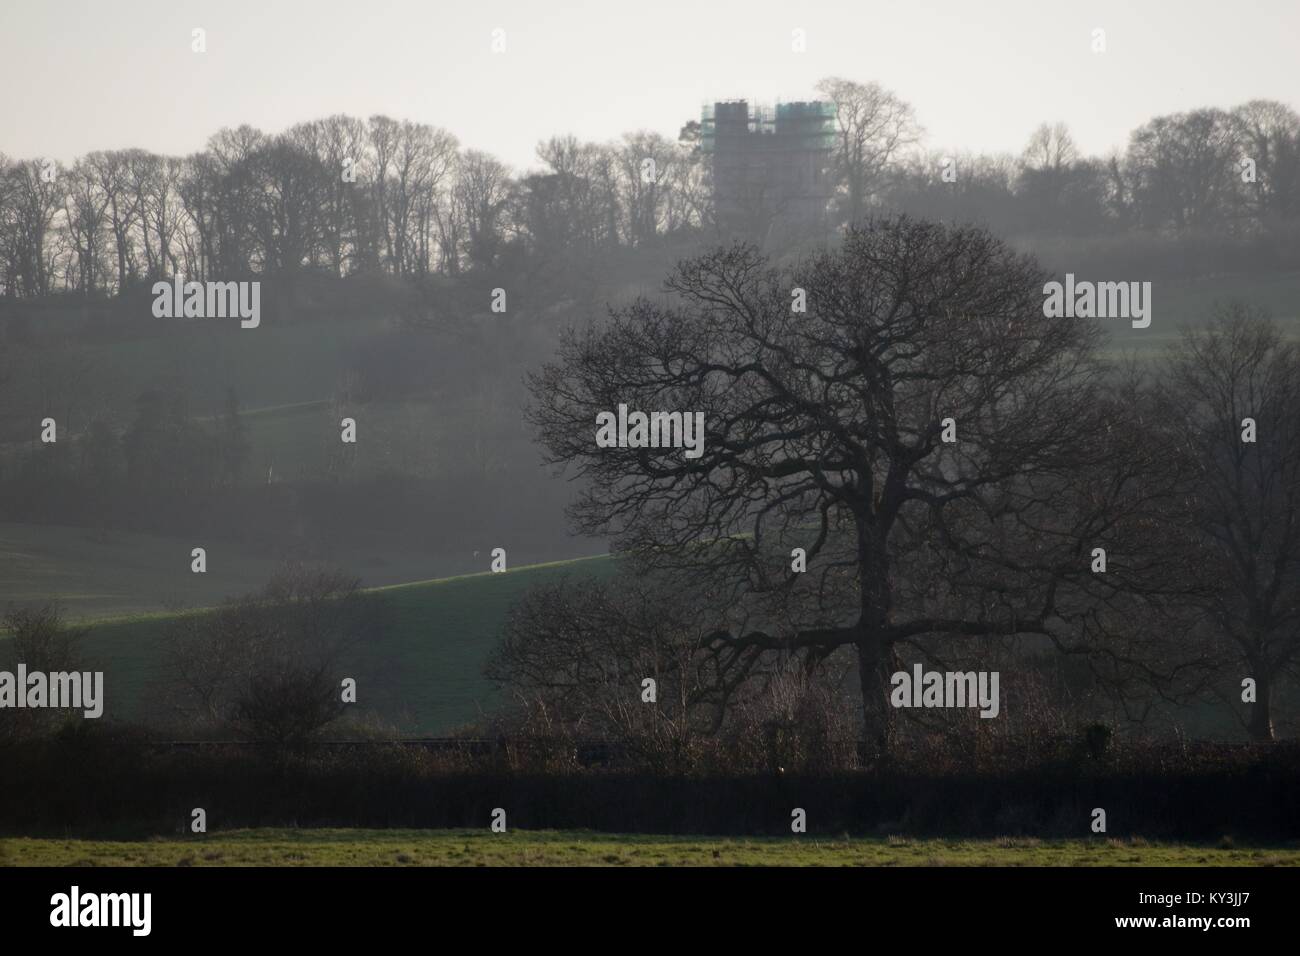 Powderham Folly Tower under Scaffolding on the Hilltop, A Winter Oak Tree Skeleton Dominating the Foreground. Devon, UK. January, 2018. Stock Photo